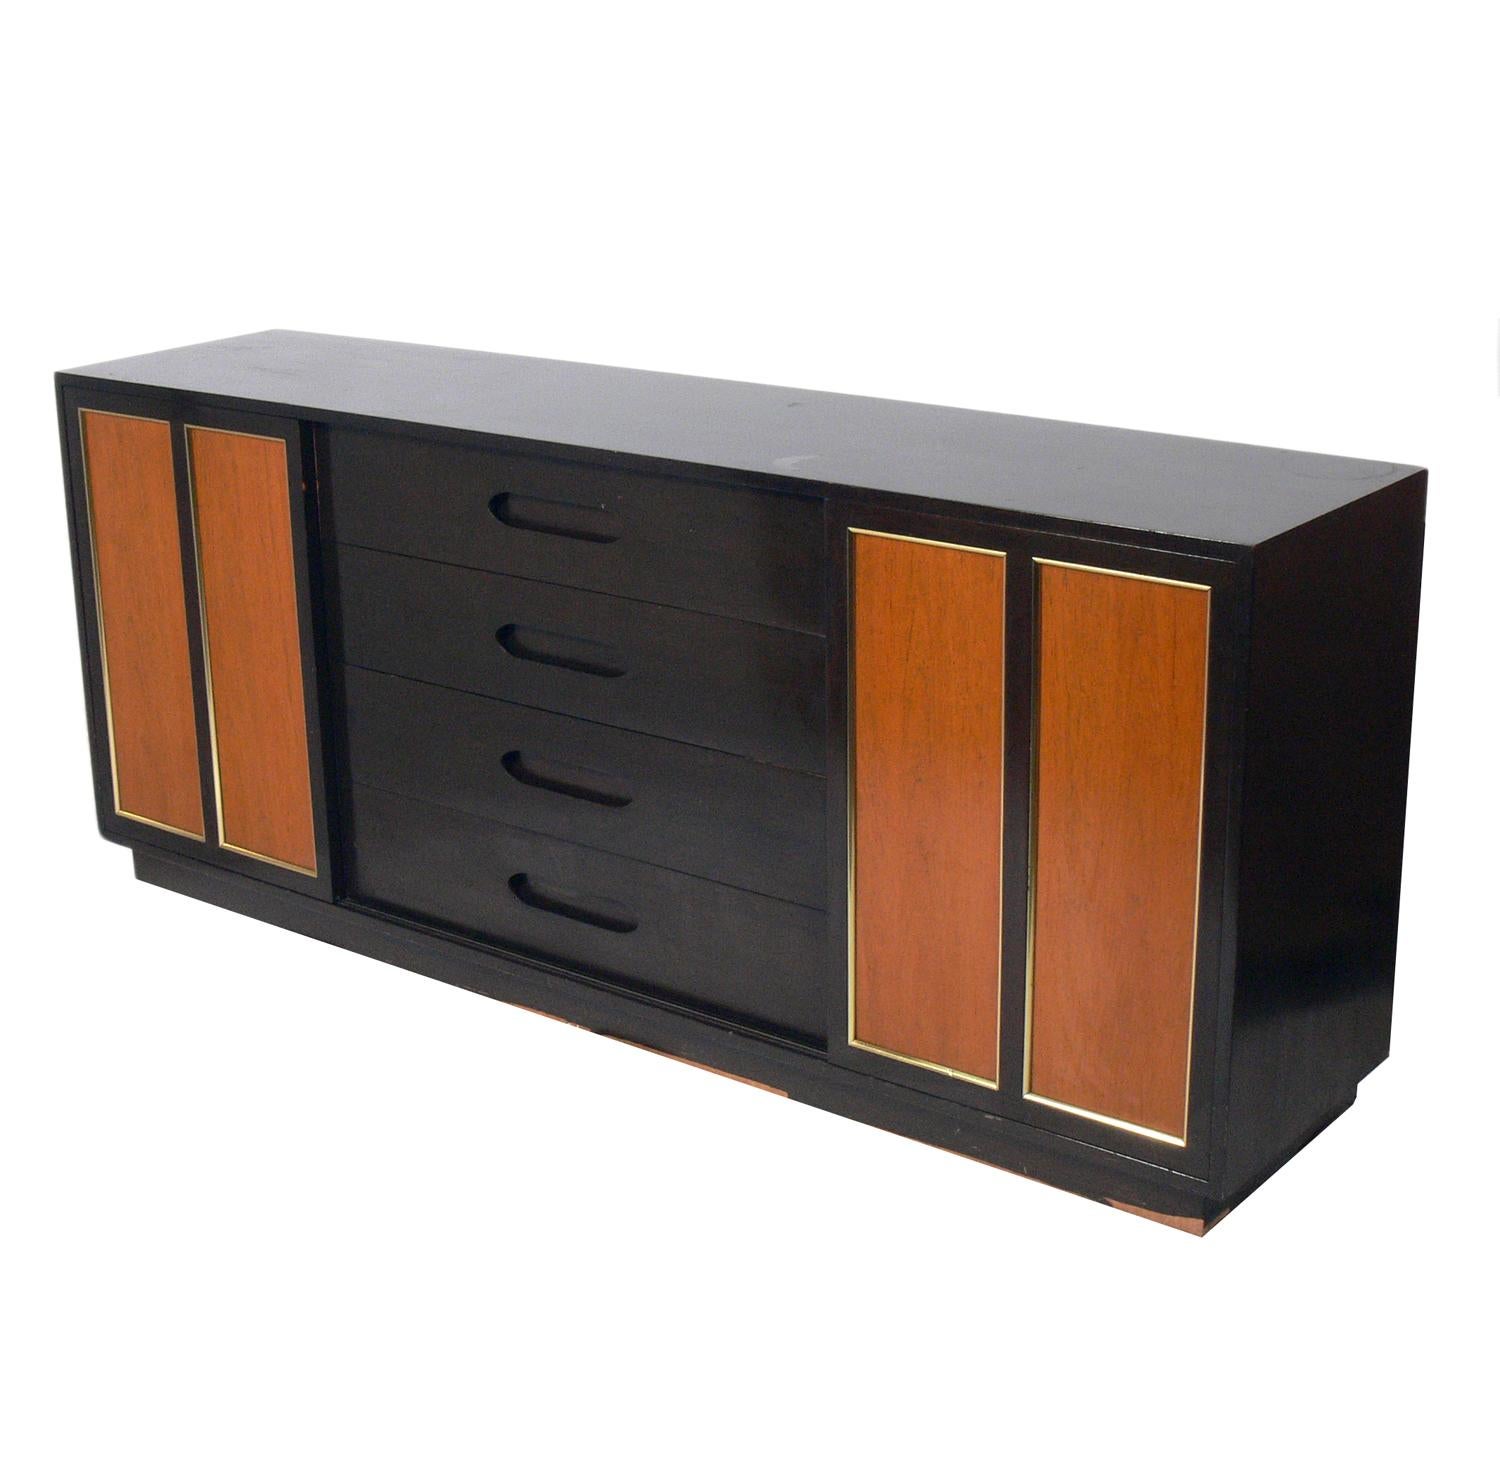 Large scale credenza or chest, designed by Harvey Probber, American, circa 1960s. This piece is a versatile size and can be used as a credenza, media center, or bar in a living area, or as a dresser or chest in a bedroom. It offers a voluminous